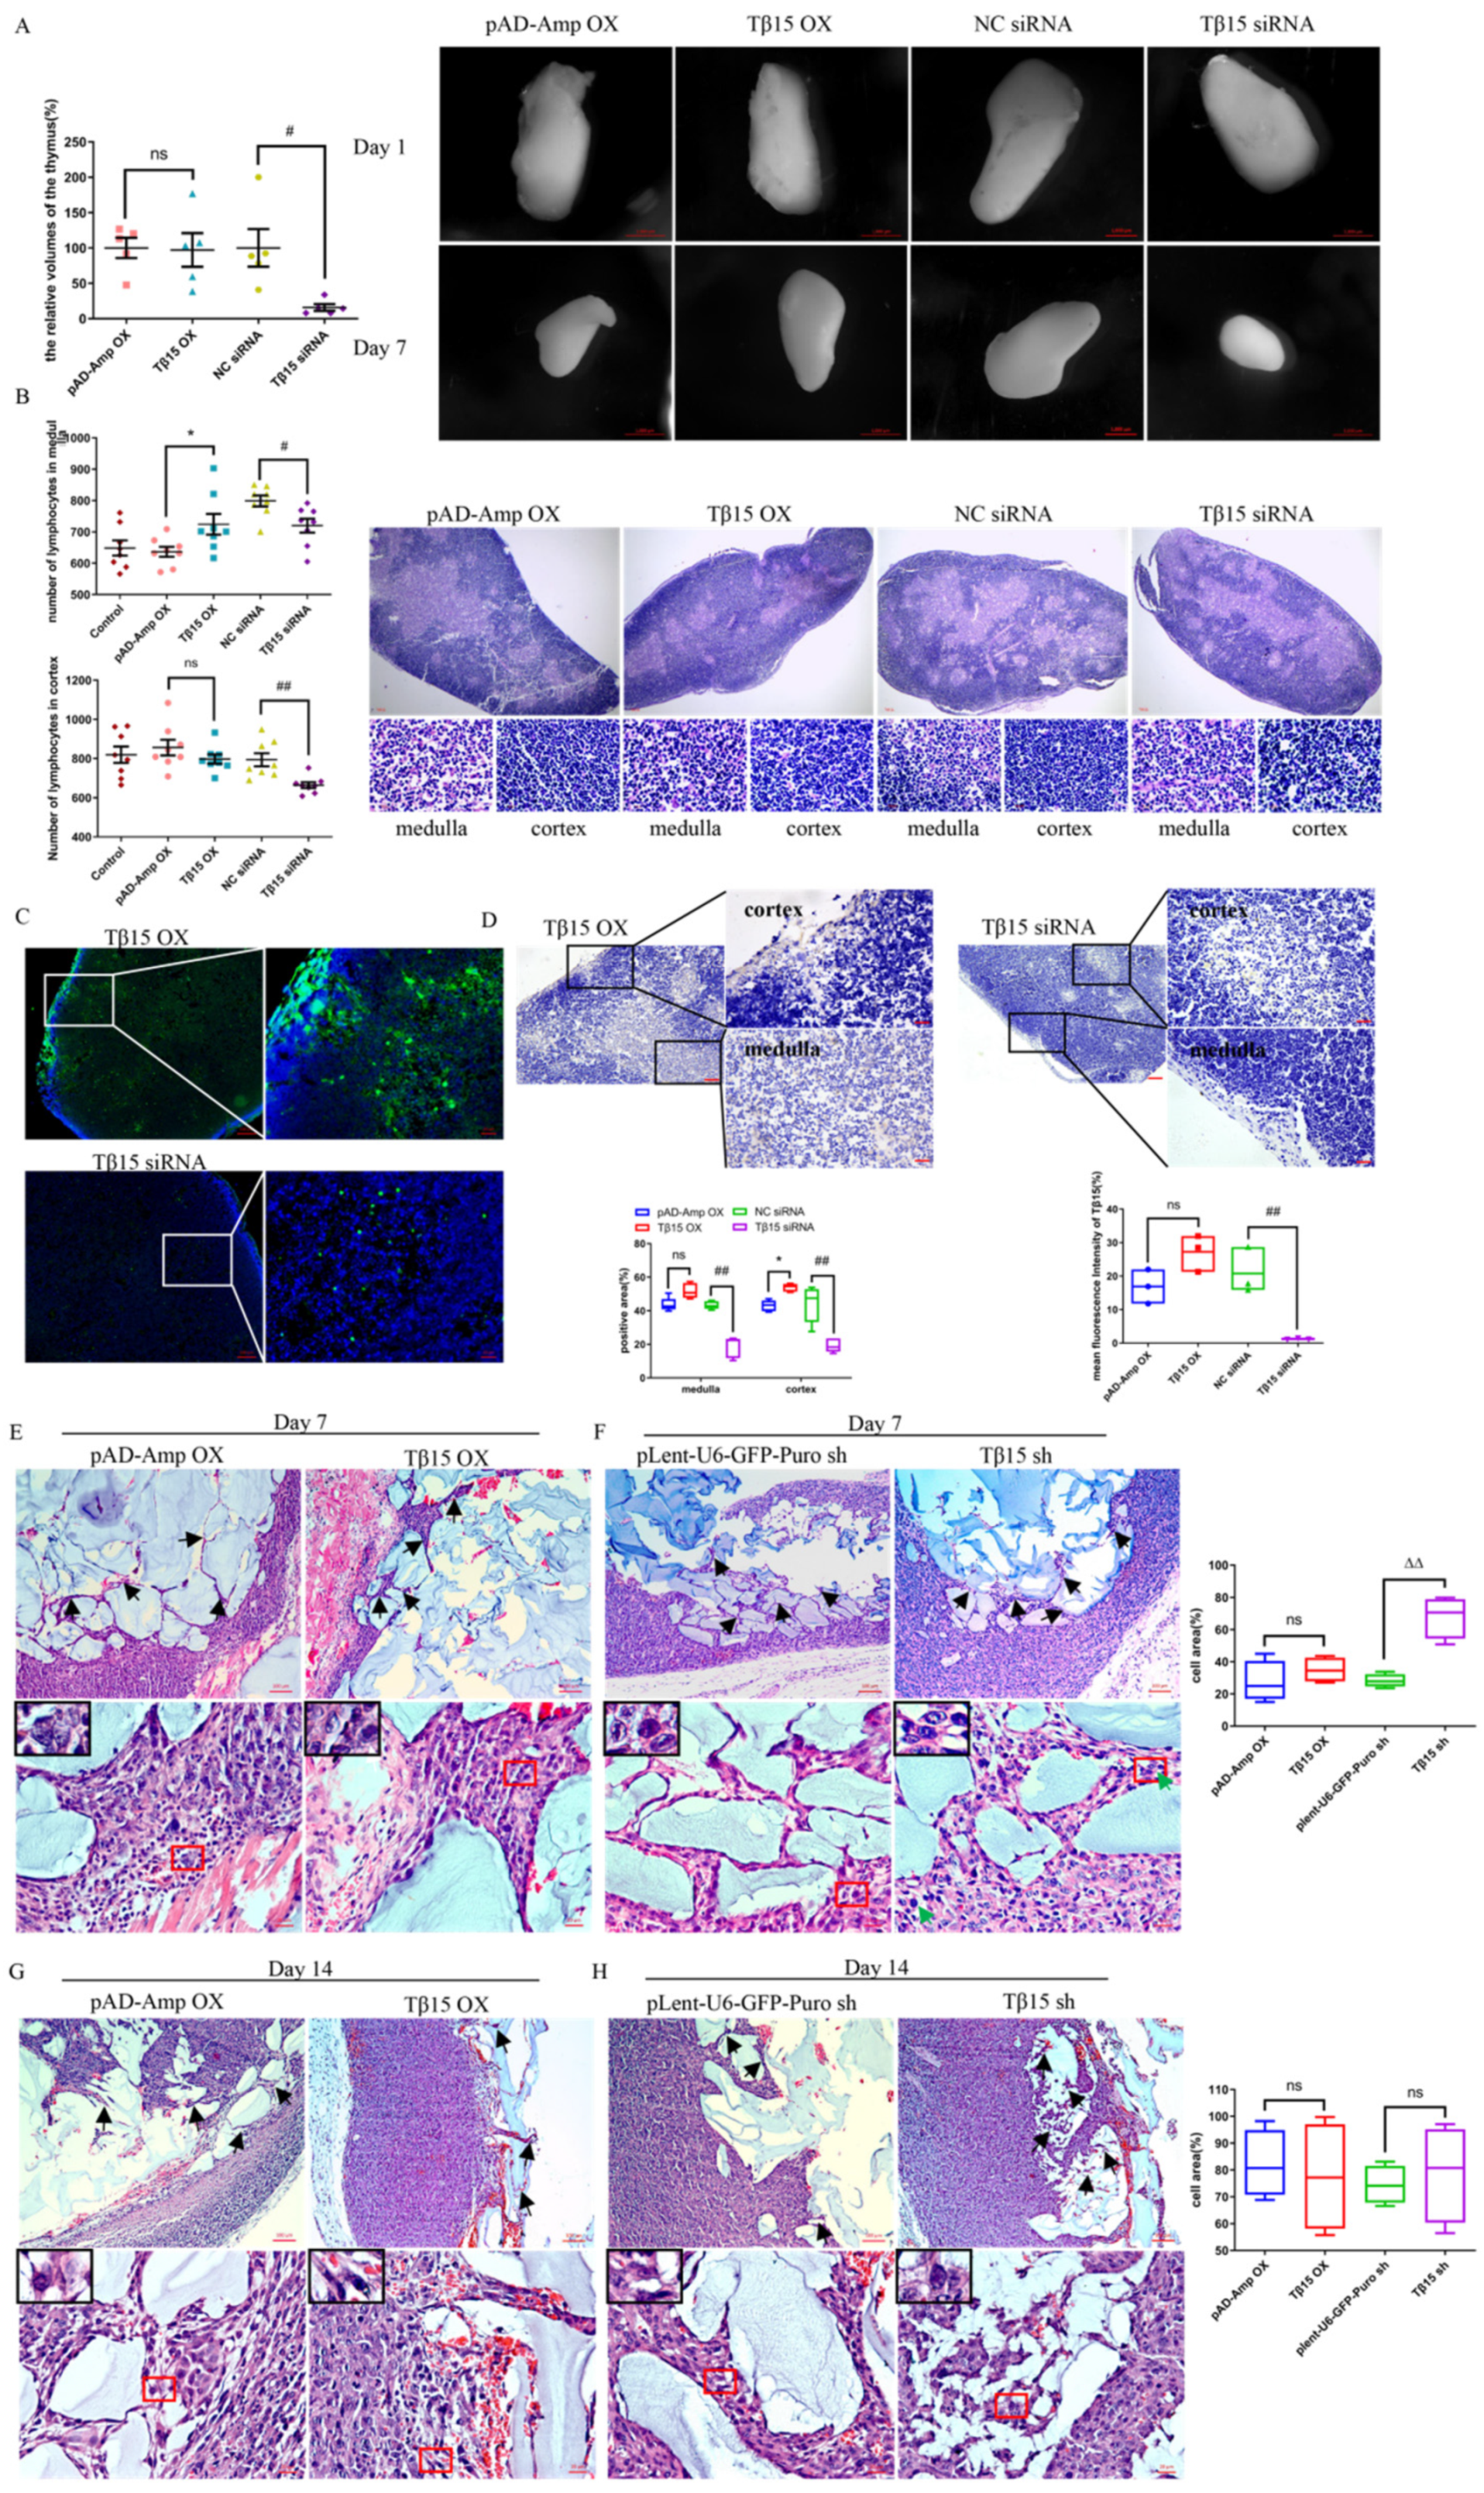 Cells | Free Full-Text | Thymosin Beta 15 Alters the Spatial